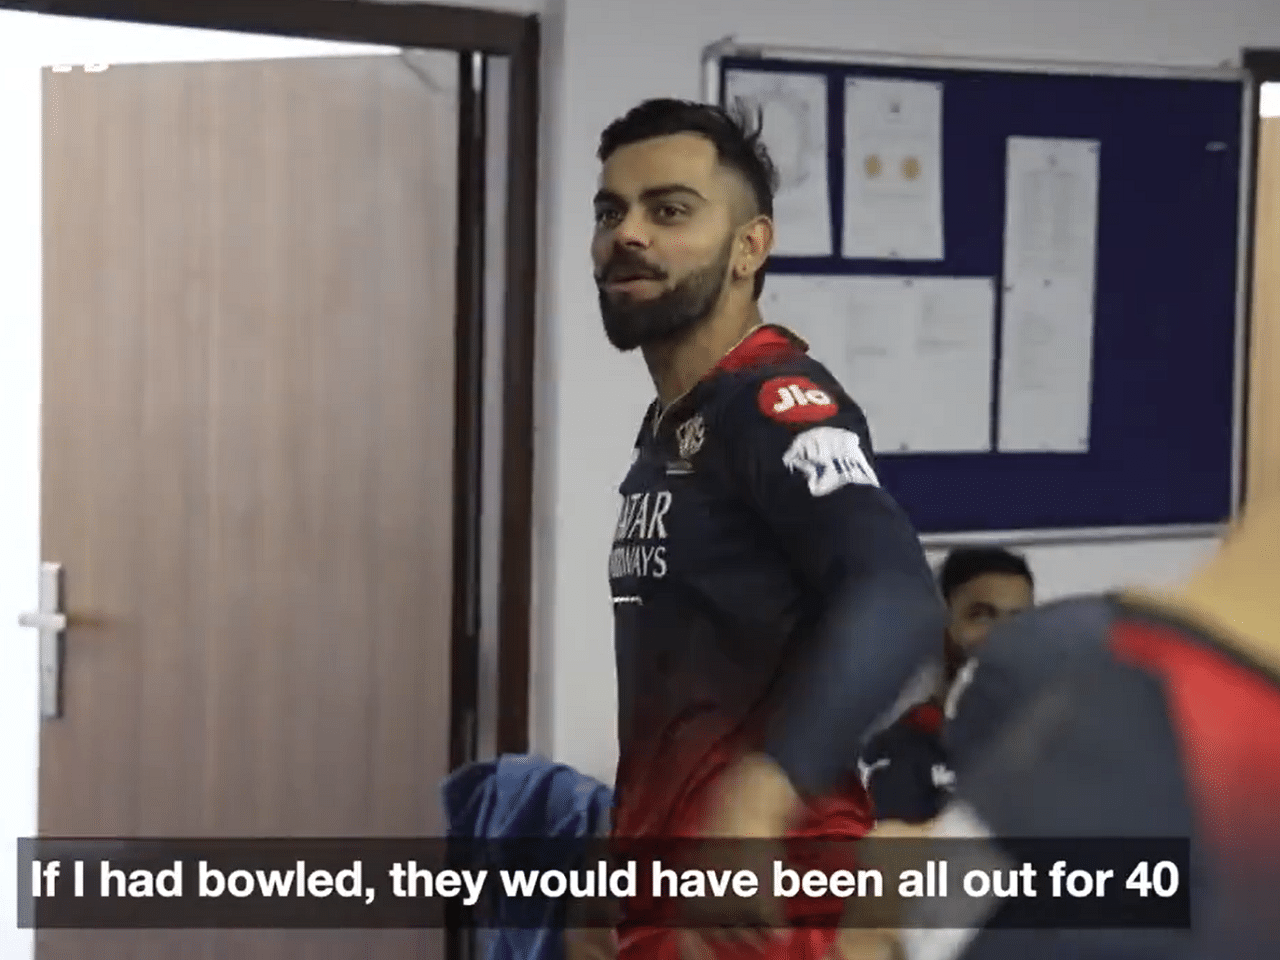 ‘If I bowled, they would have been all out for 40’: Virat Kohli after RCB bundle out RR for 59 in IPL 2023 – Watch video